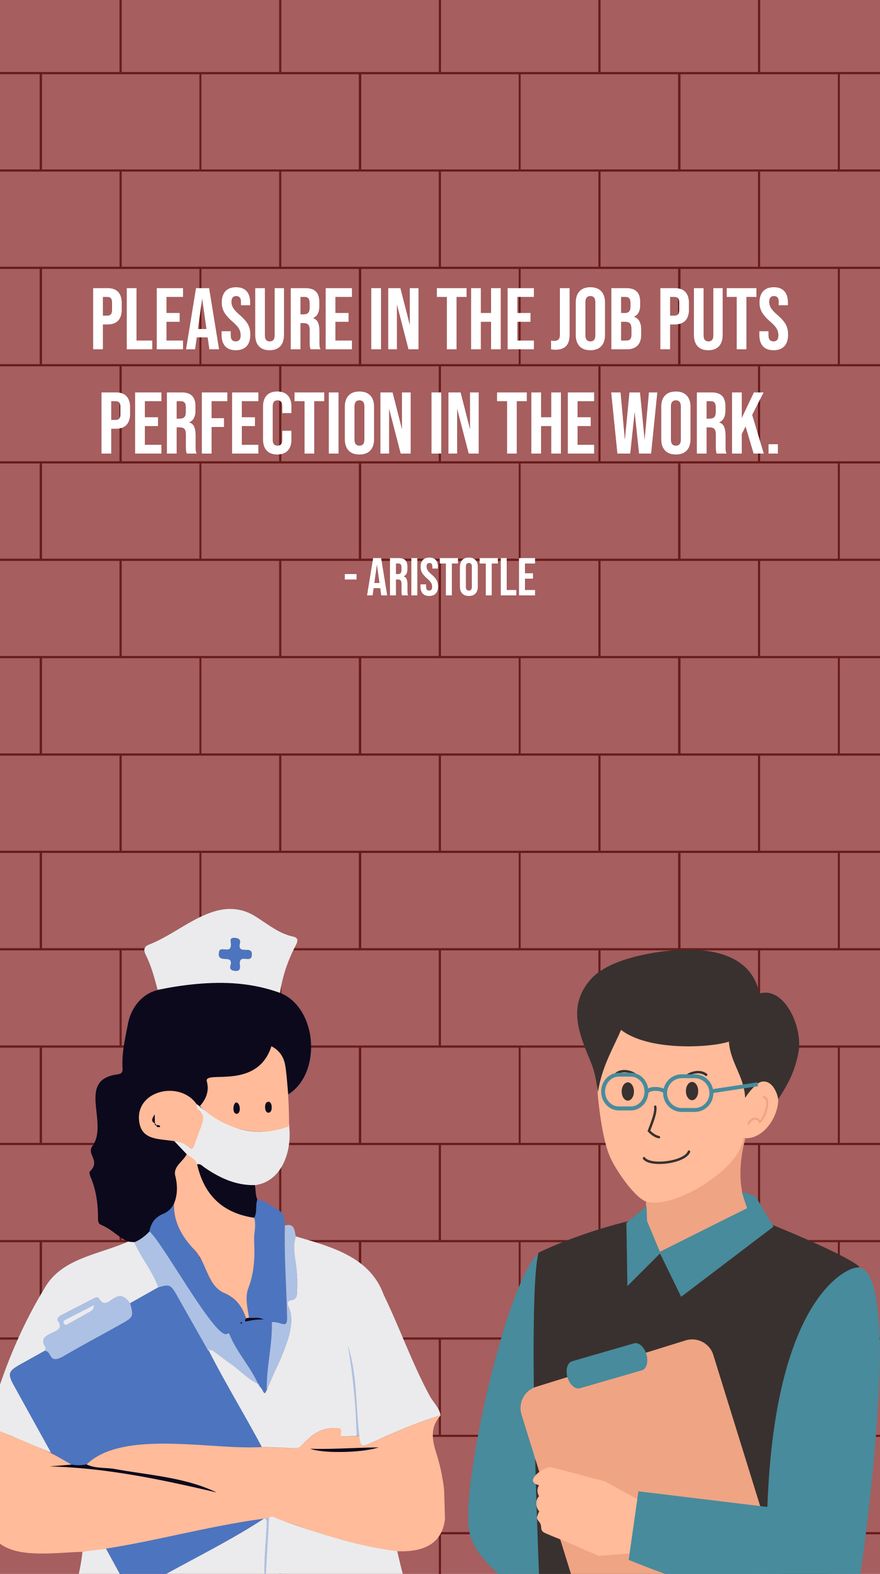 Free Aristotle - Pleasure in the job puts perfection in the work.